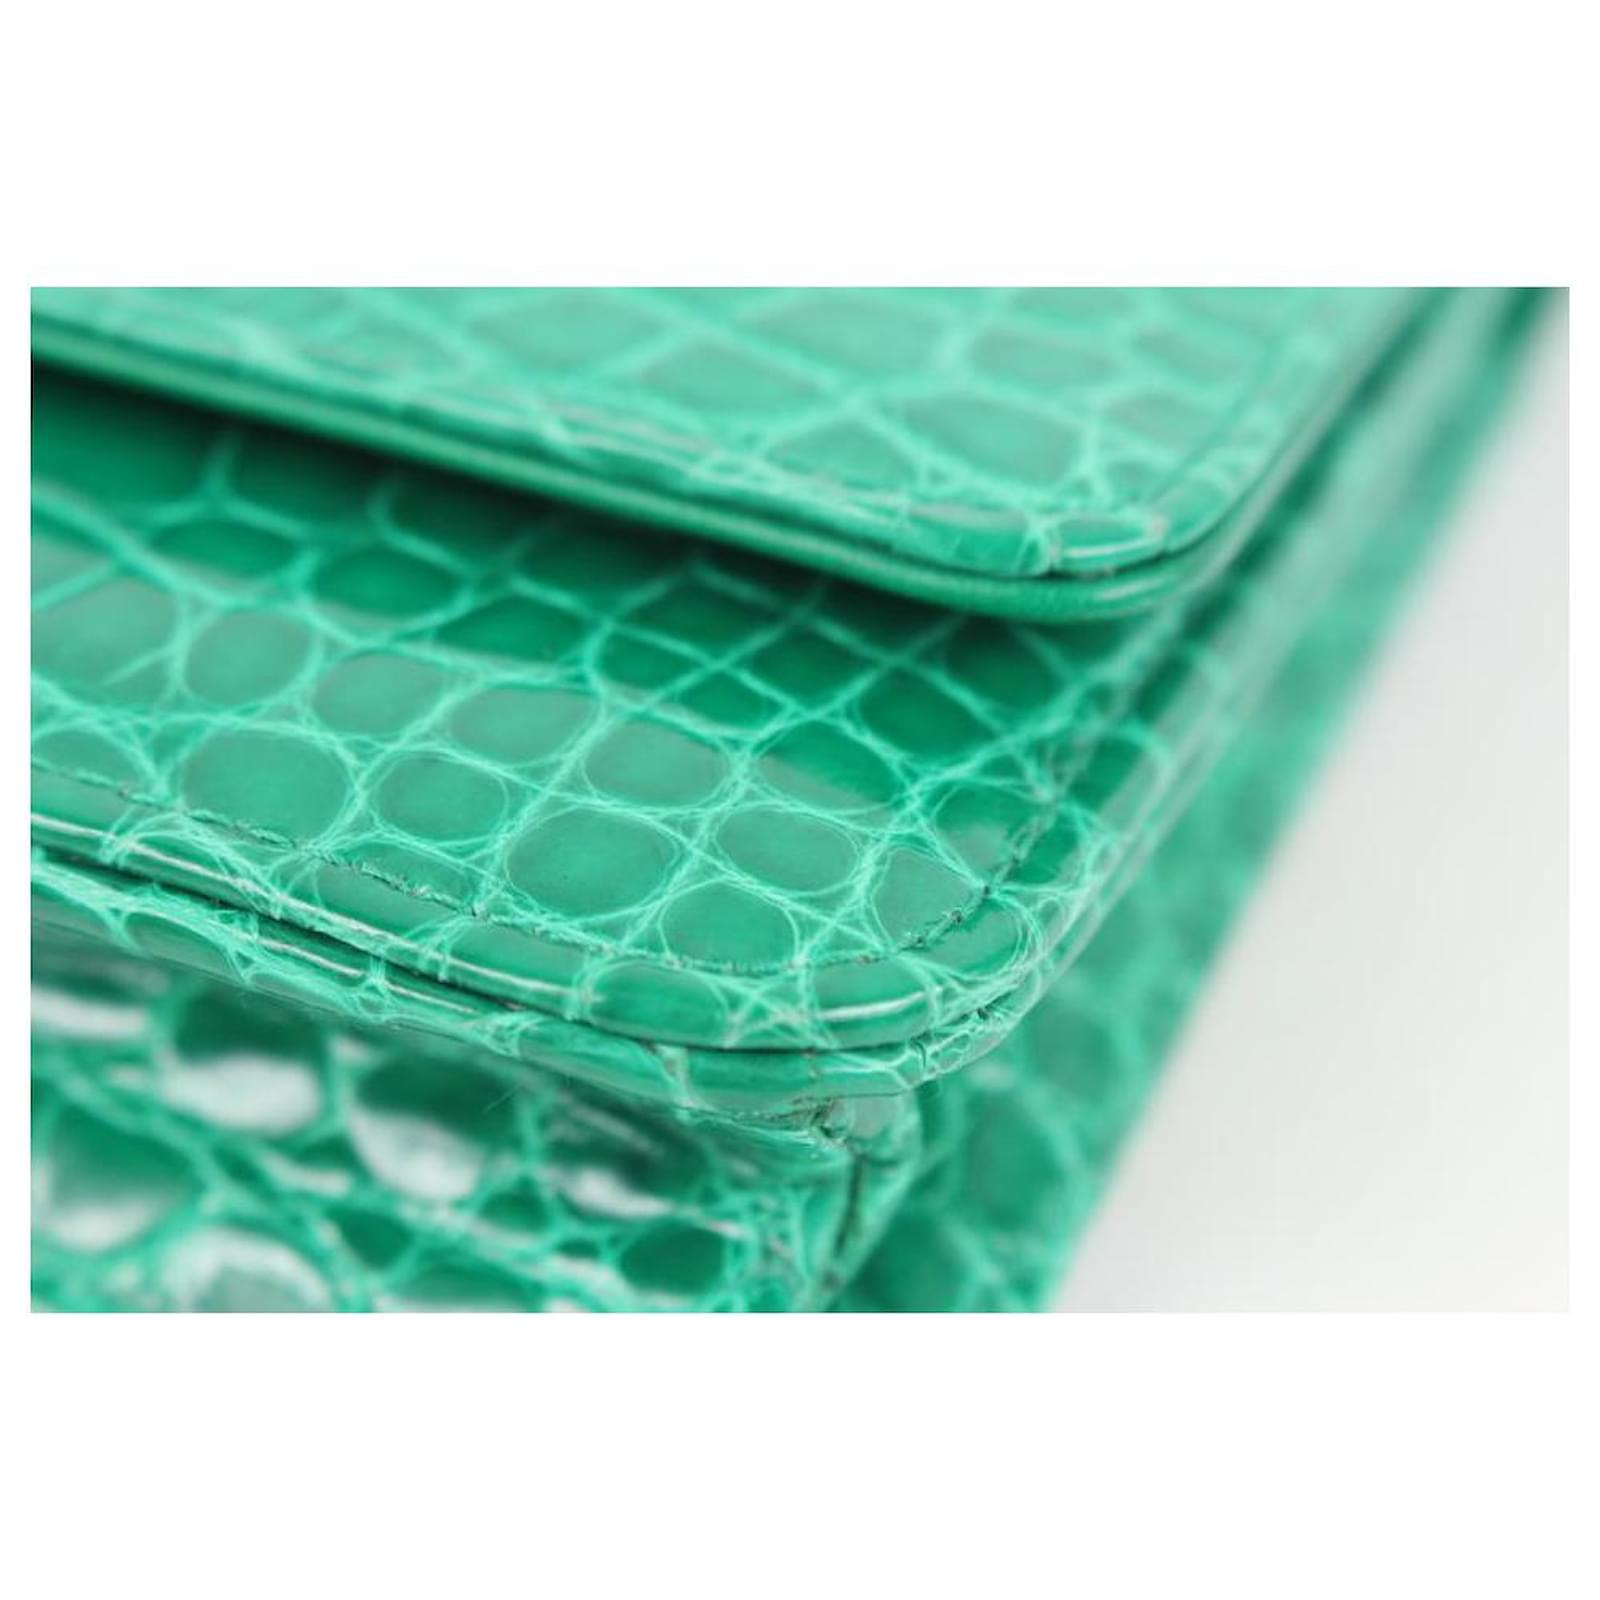 CHANEL, Bags, Chanel Ultra Rare Emerald Green Alligator Wallet On Chain  Shw Woc 46cz44s